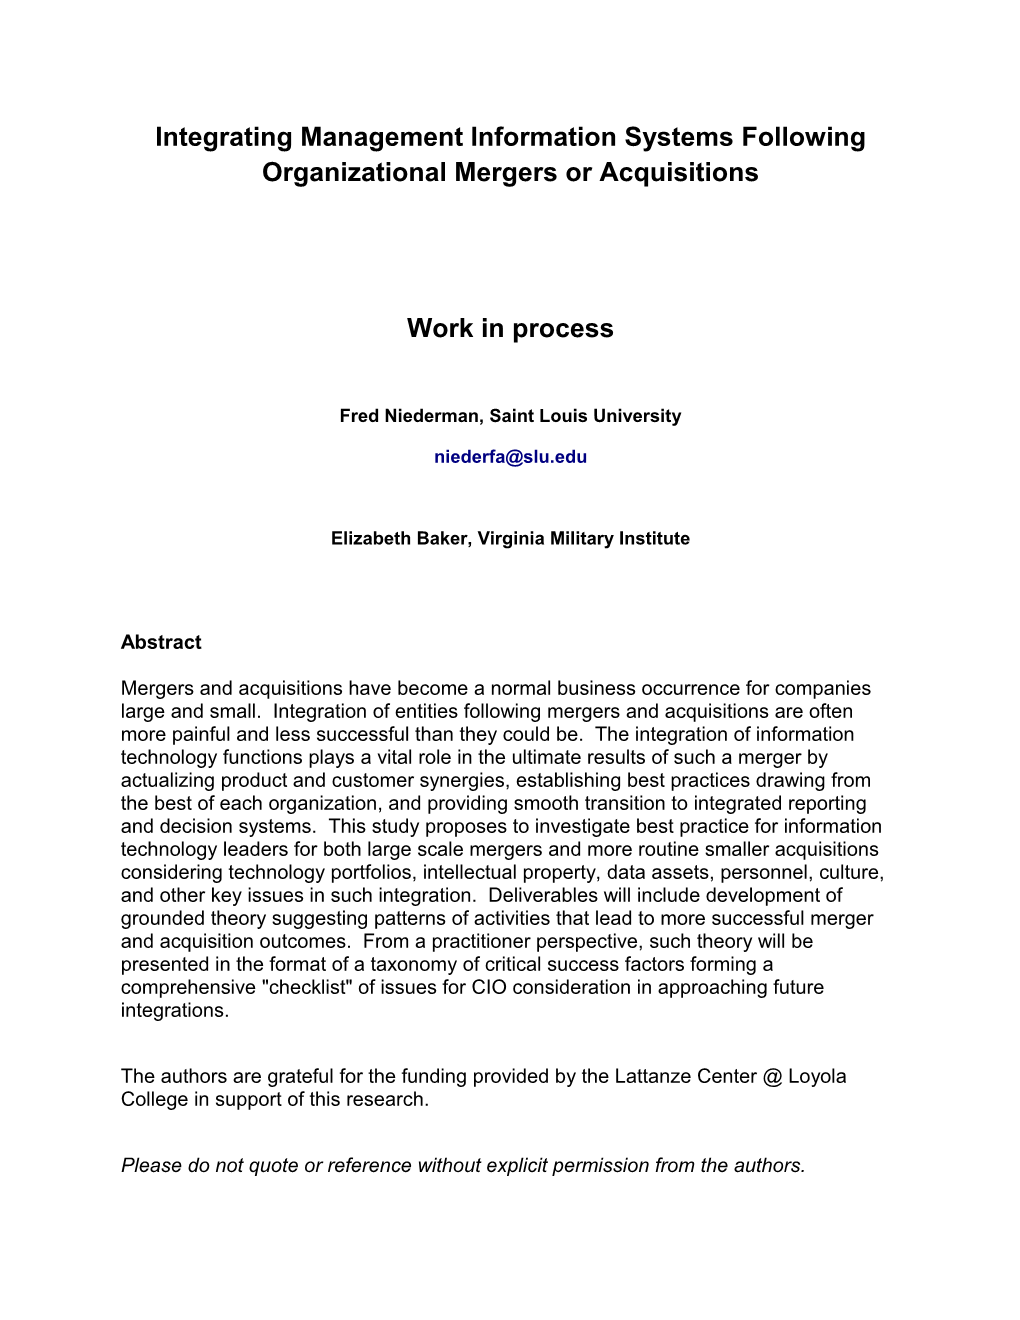 Integrating Management Information Systems Following Organizational Mergers Or Acquisitions